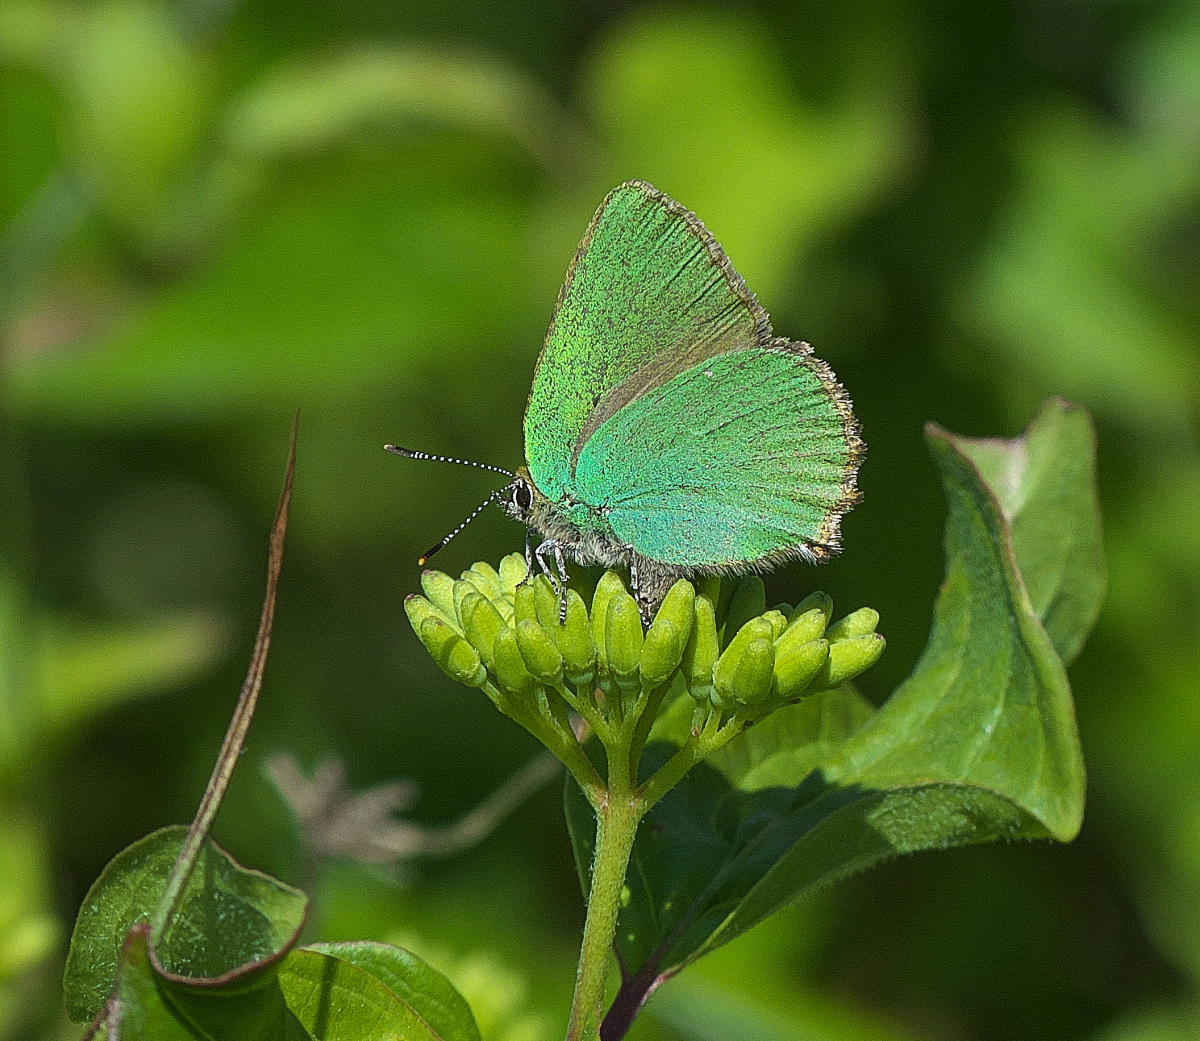 green butterfly images